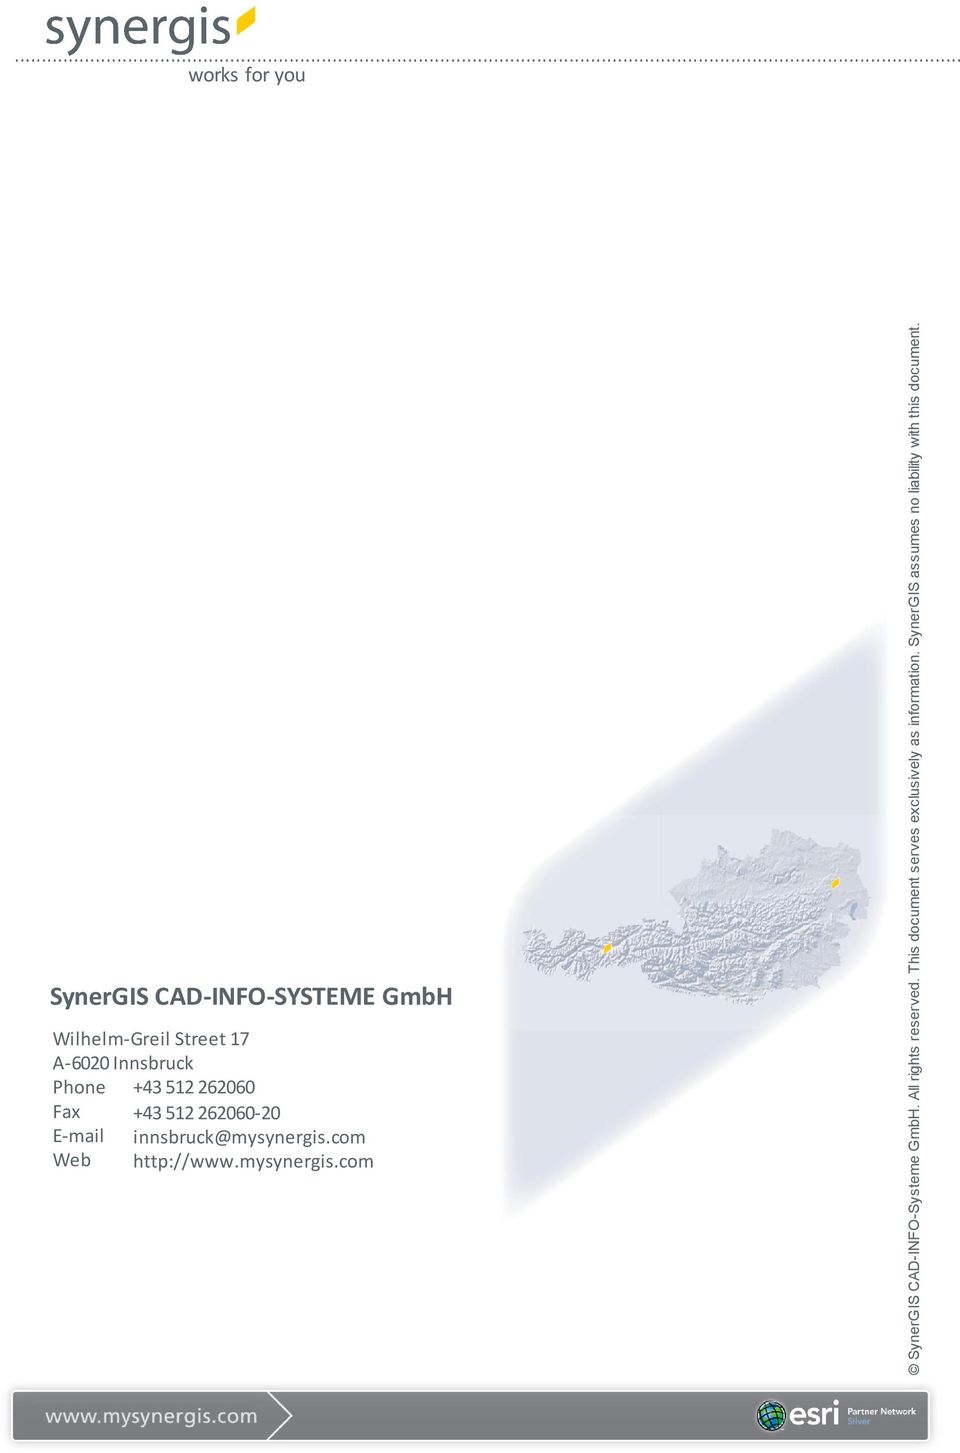 mysynergis.com SynerGIS CAD-INFO-Systeme GmbH. All rights reserved.